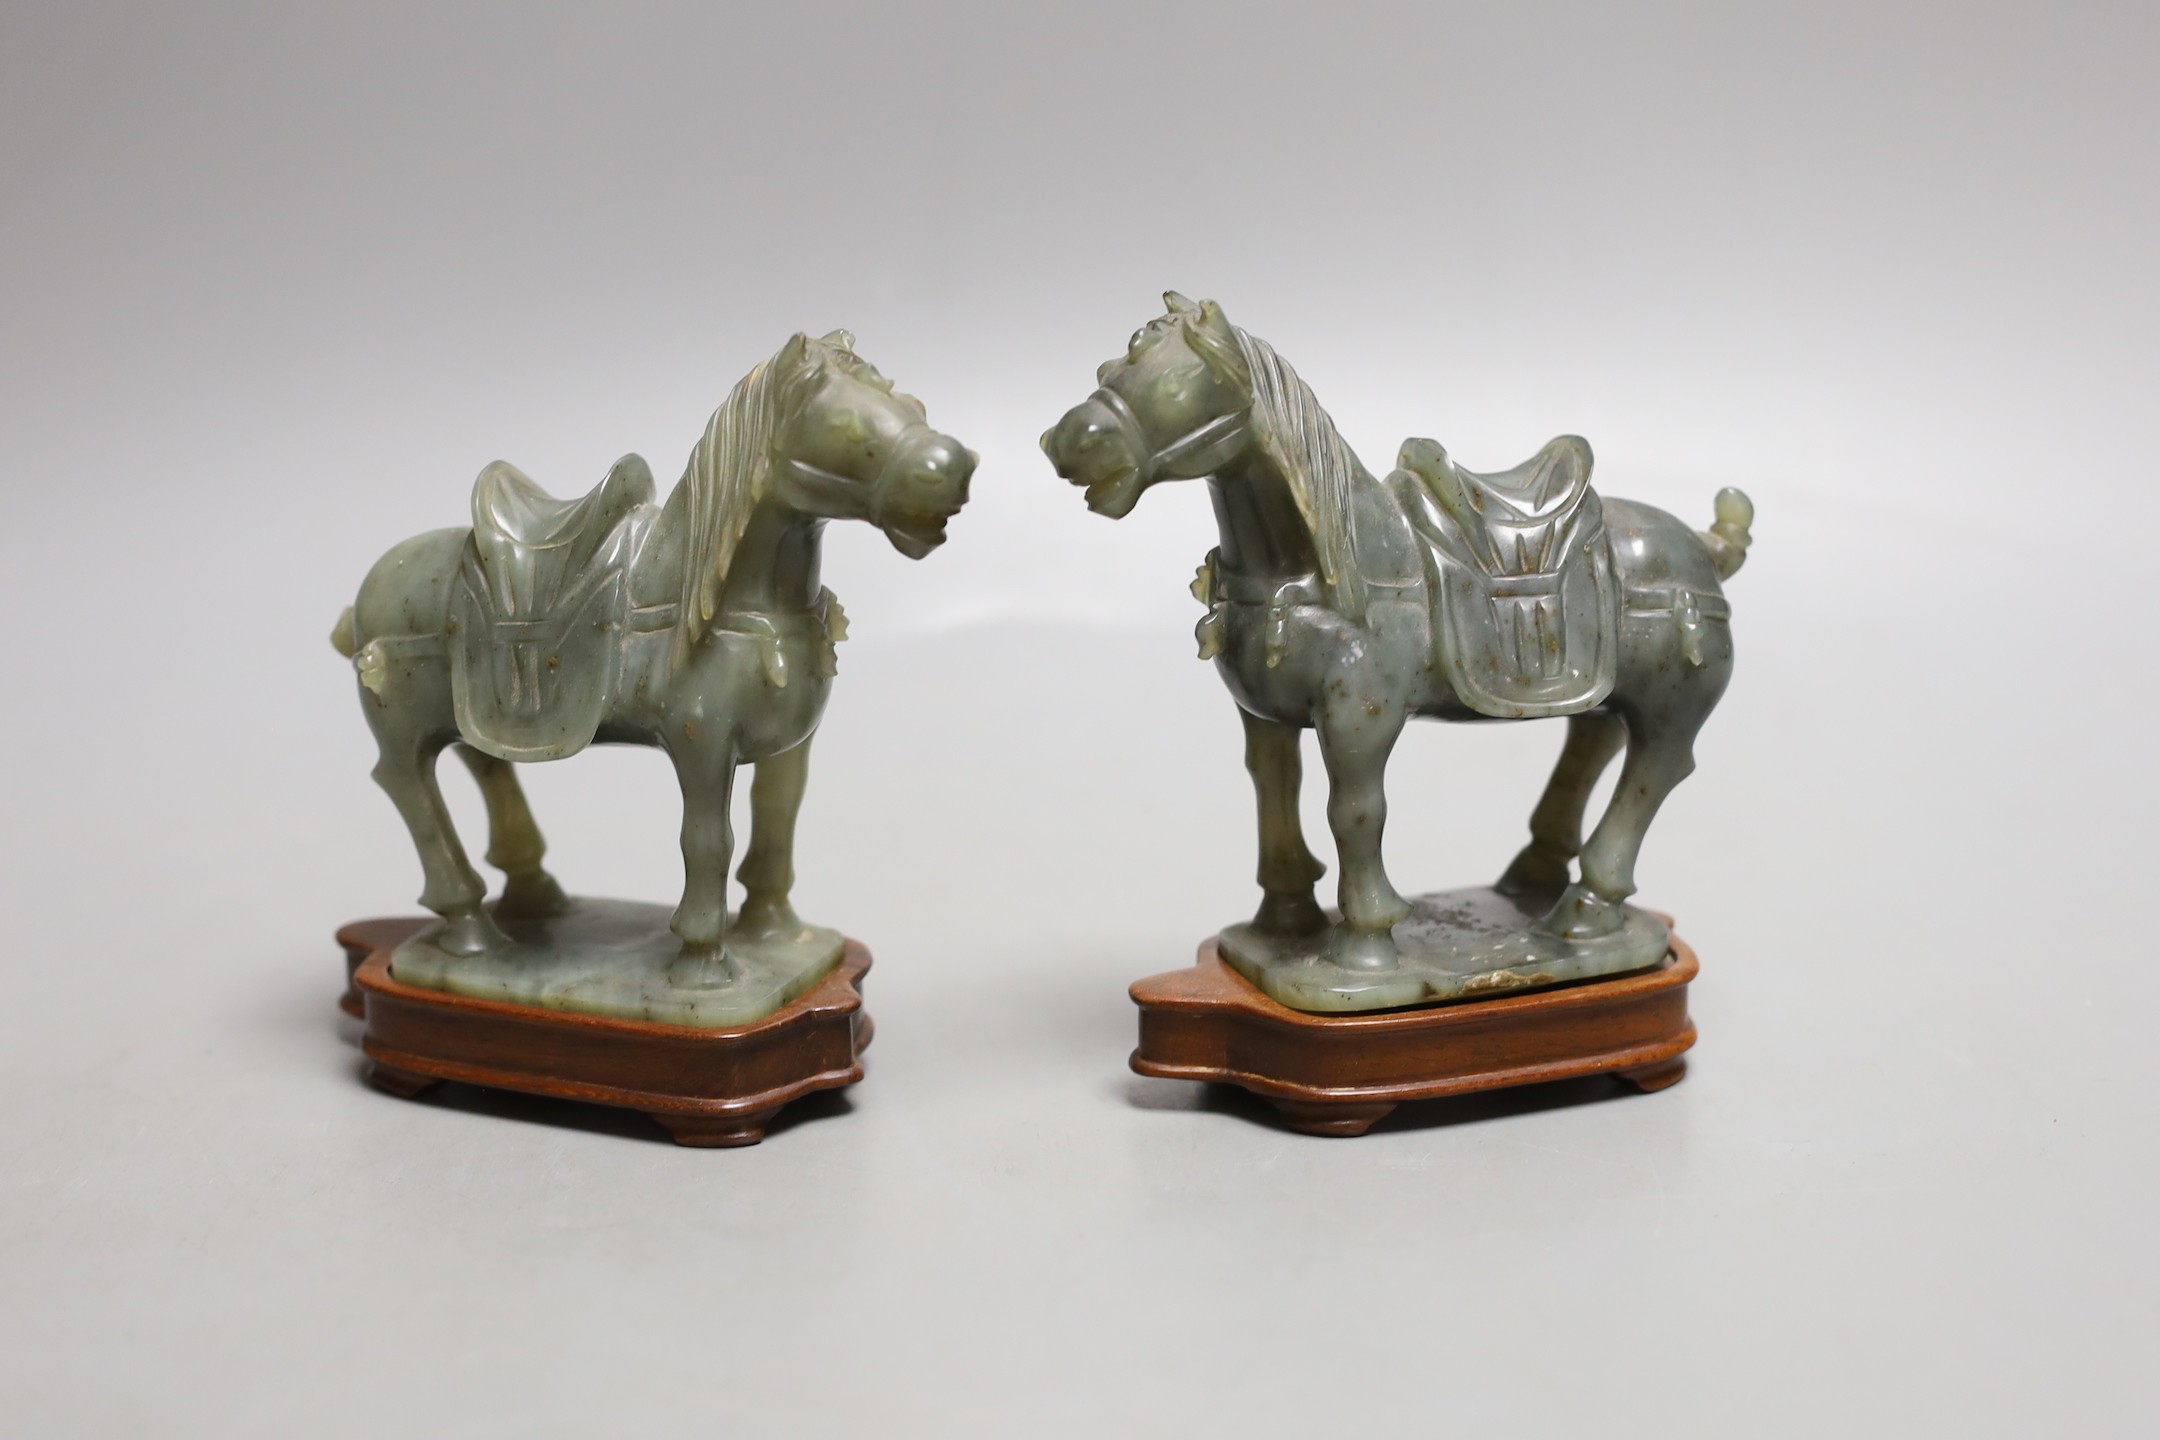 A pair of 20th century Chinese celadon jade figures of horses - 12cm tall